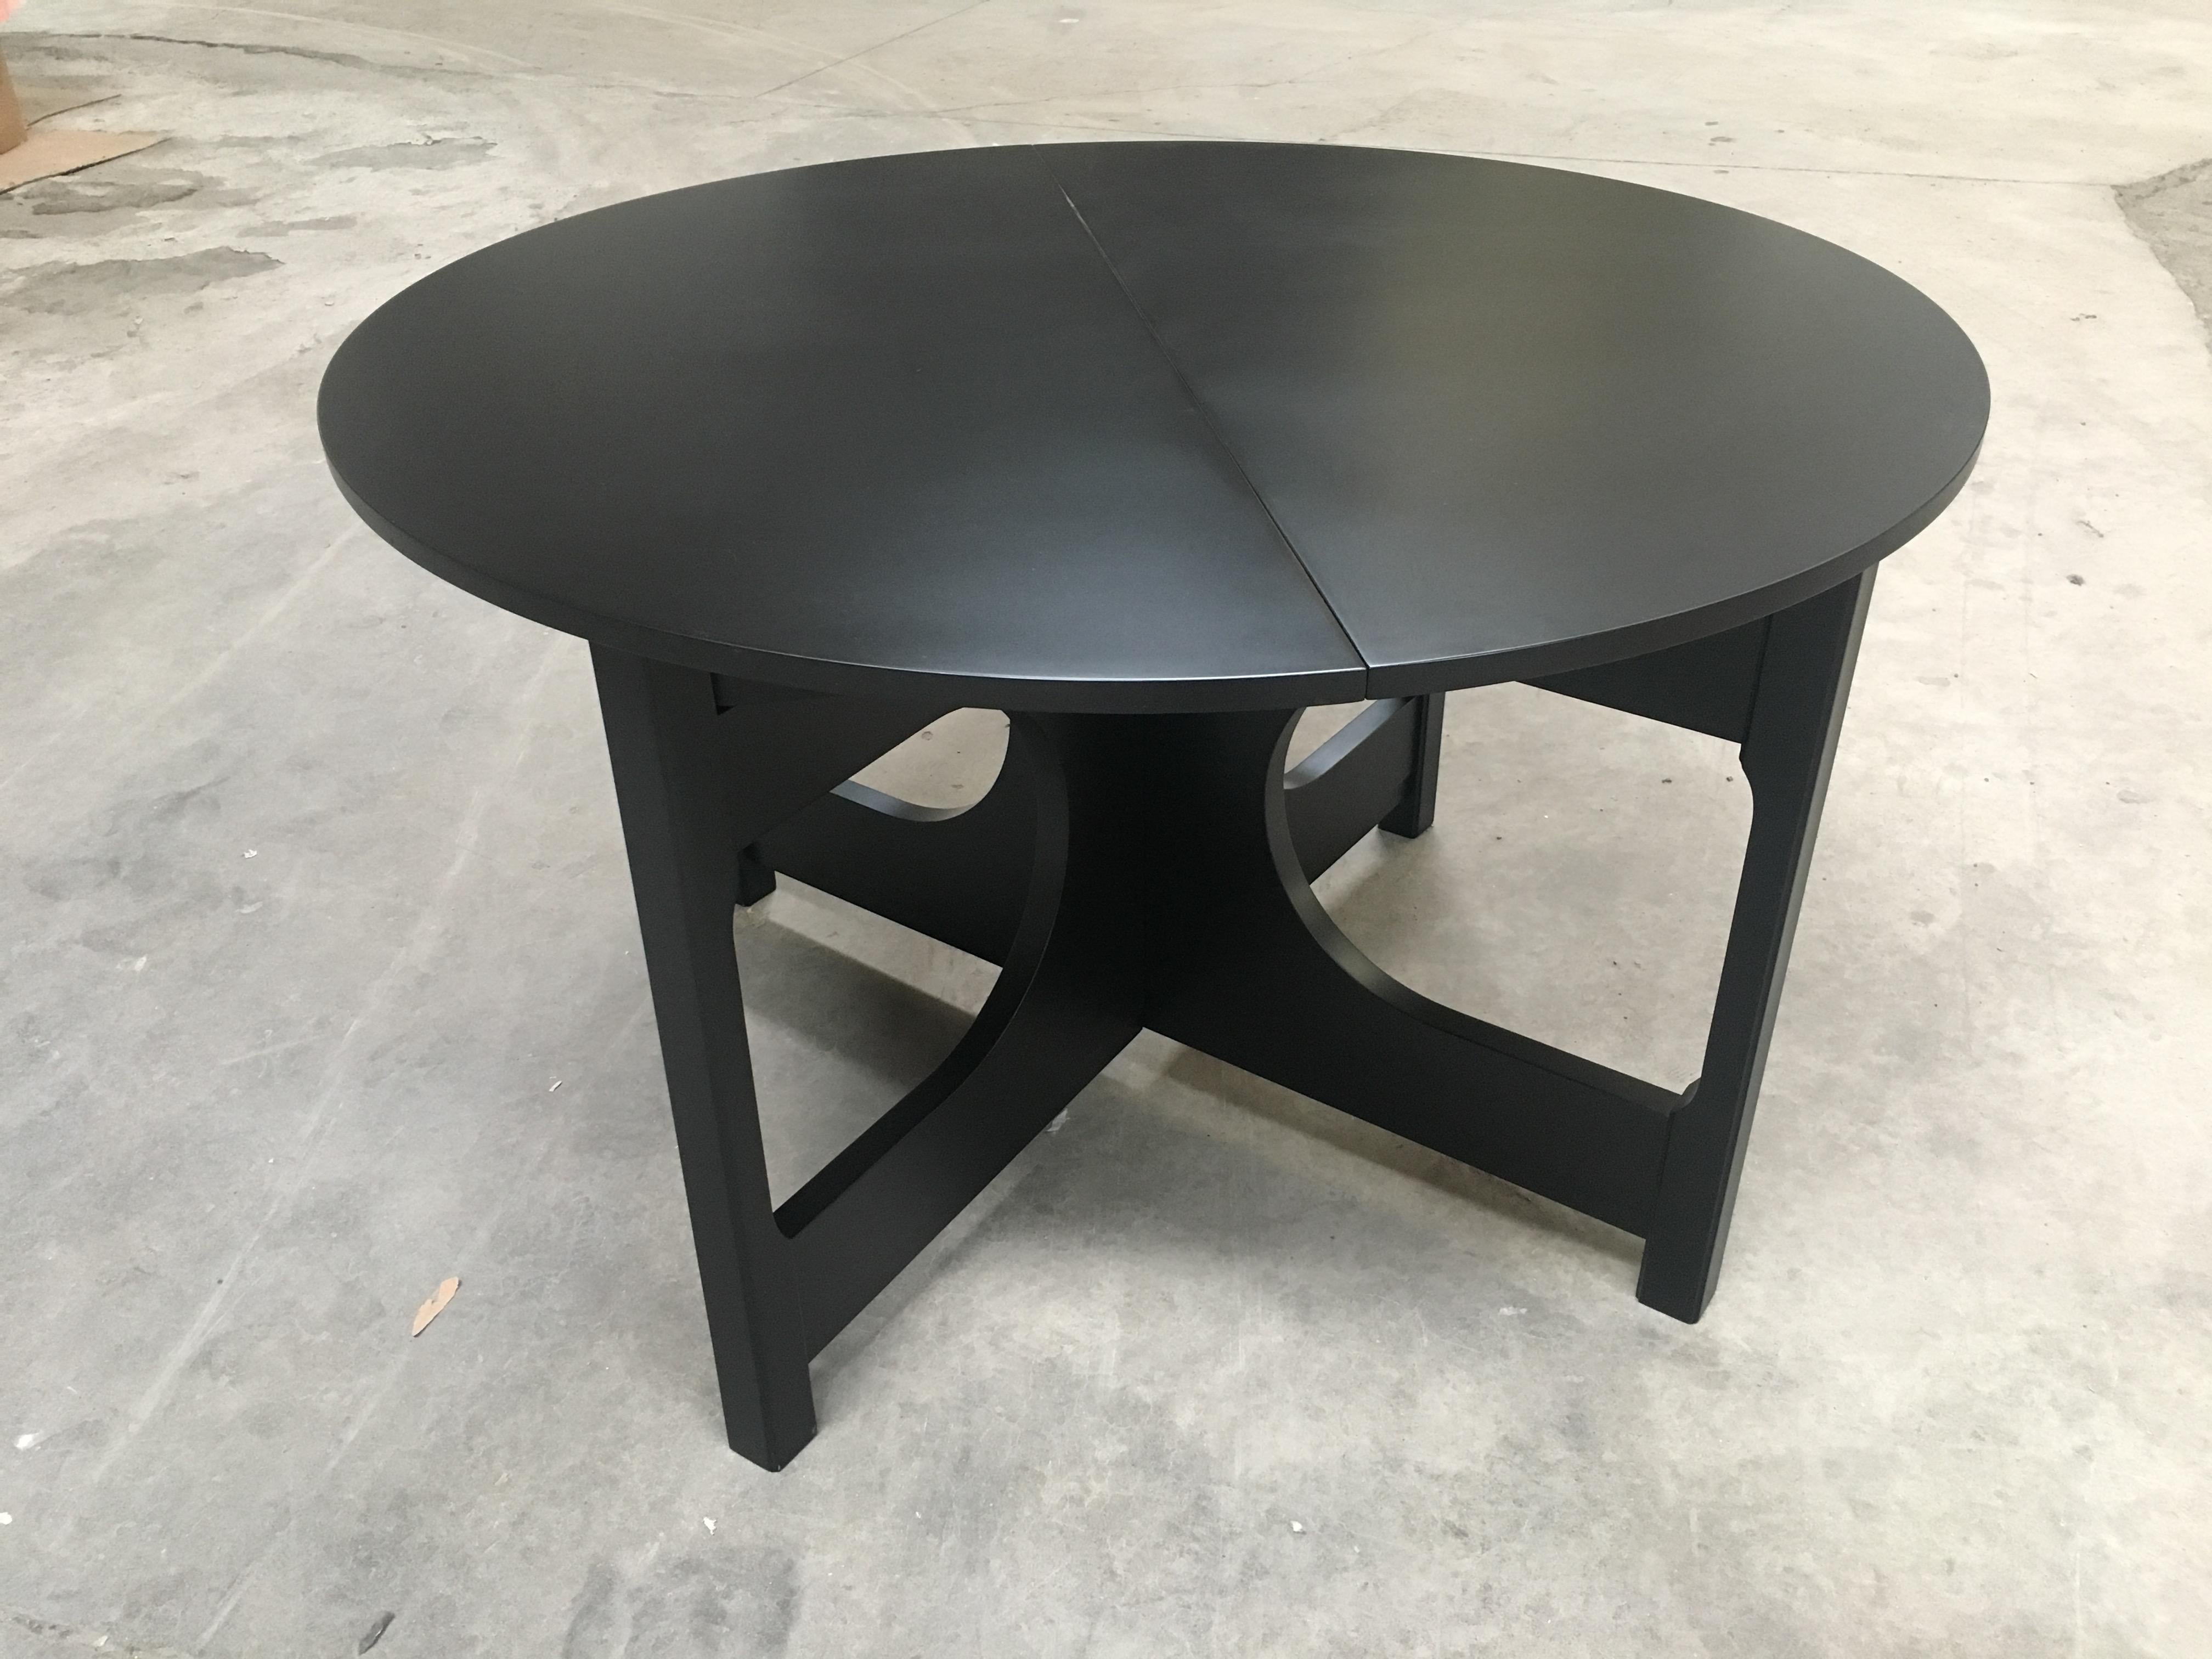 Mid-Century Modern Italian adjustable black lacquered wood dining table.
When closed the table measures cm 118 x 118 x H 74.
When opened the table measures cm 118 x 158 x H 74.
 